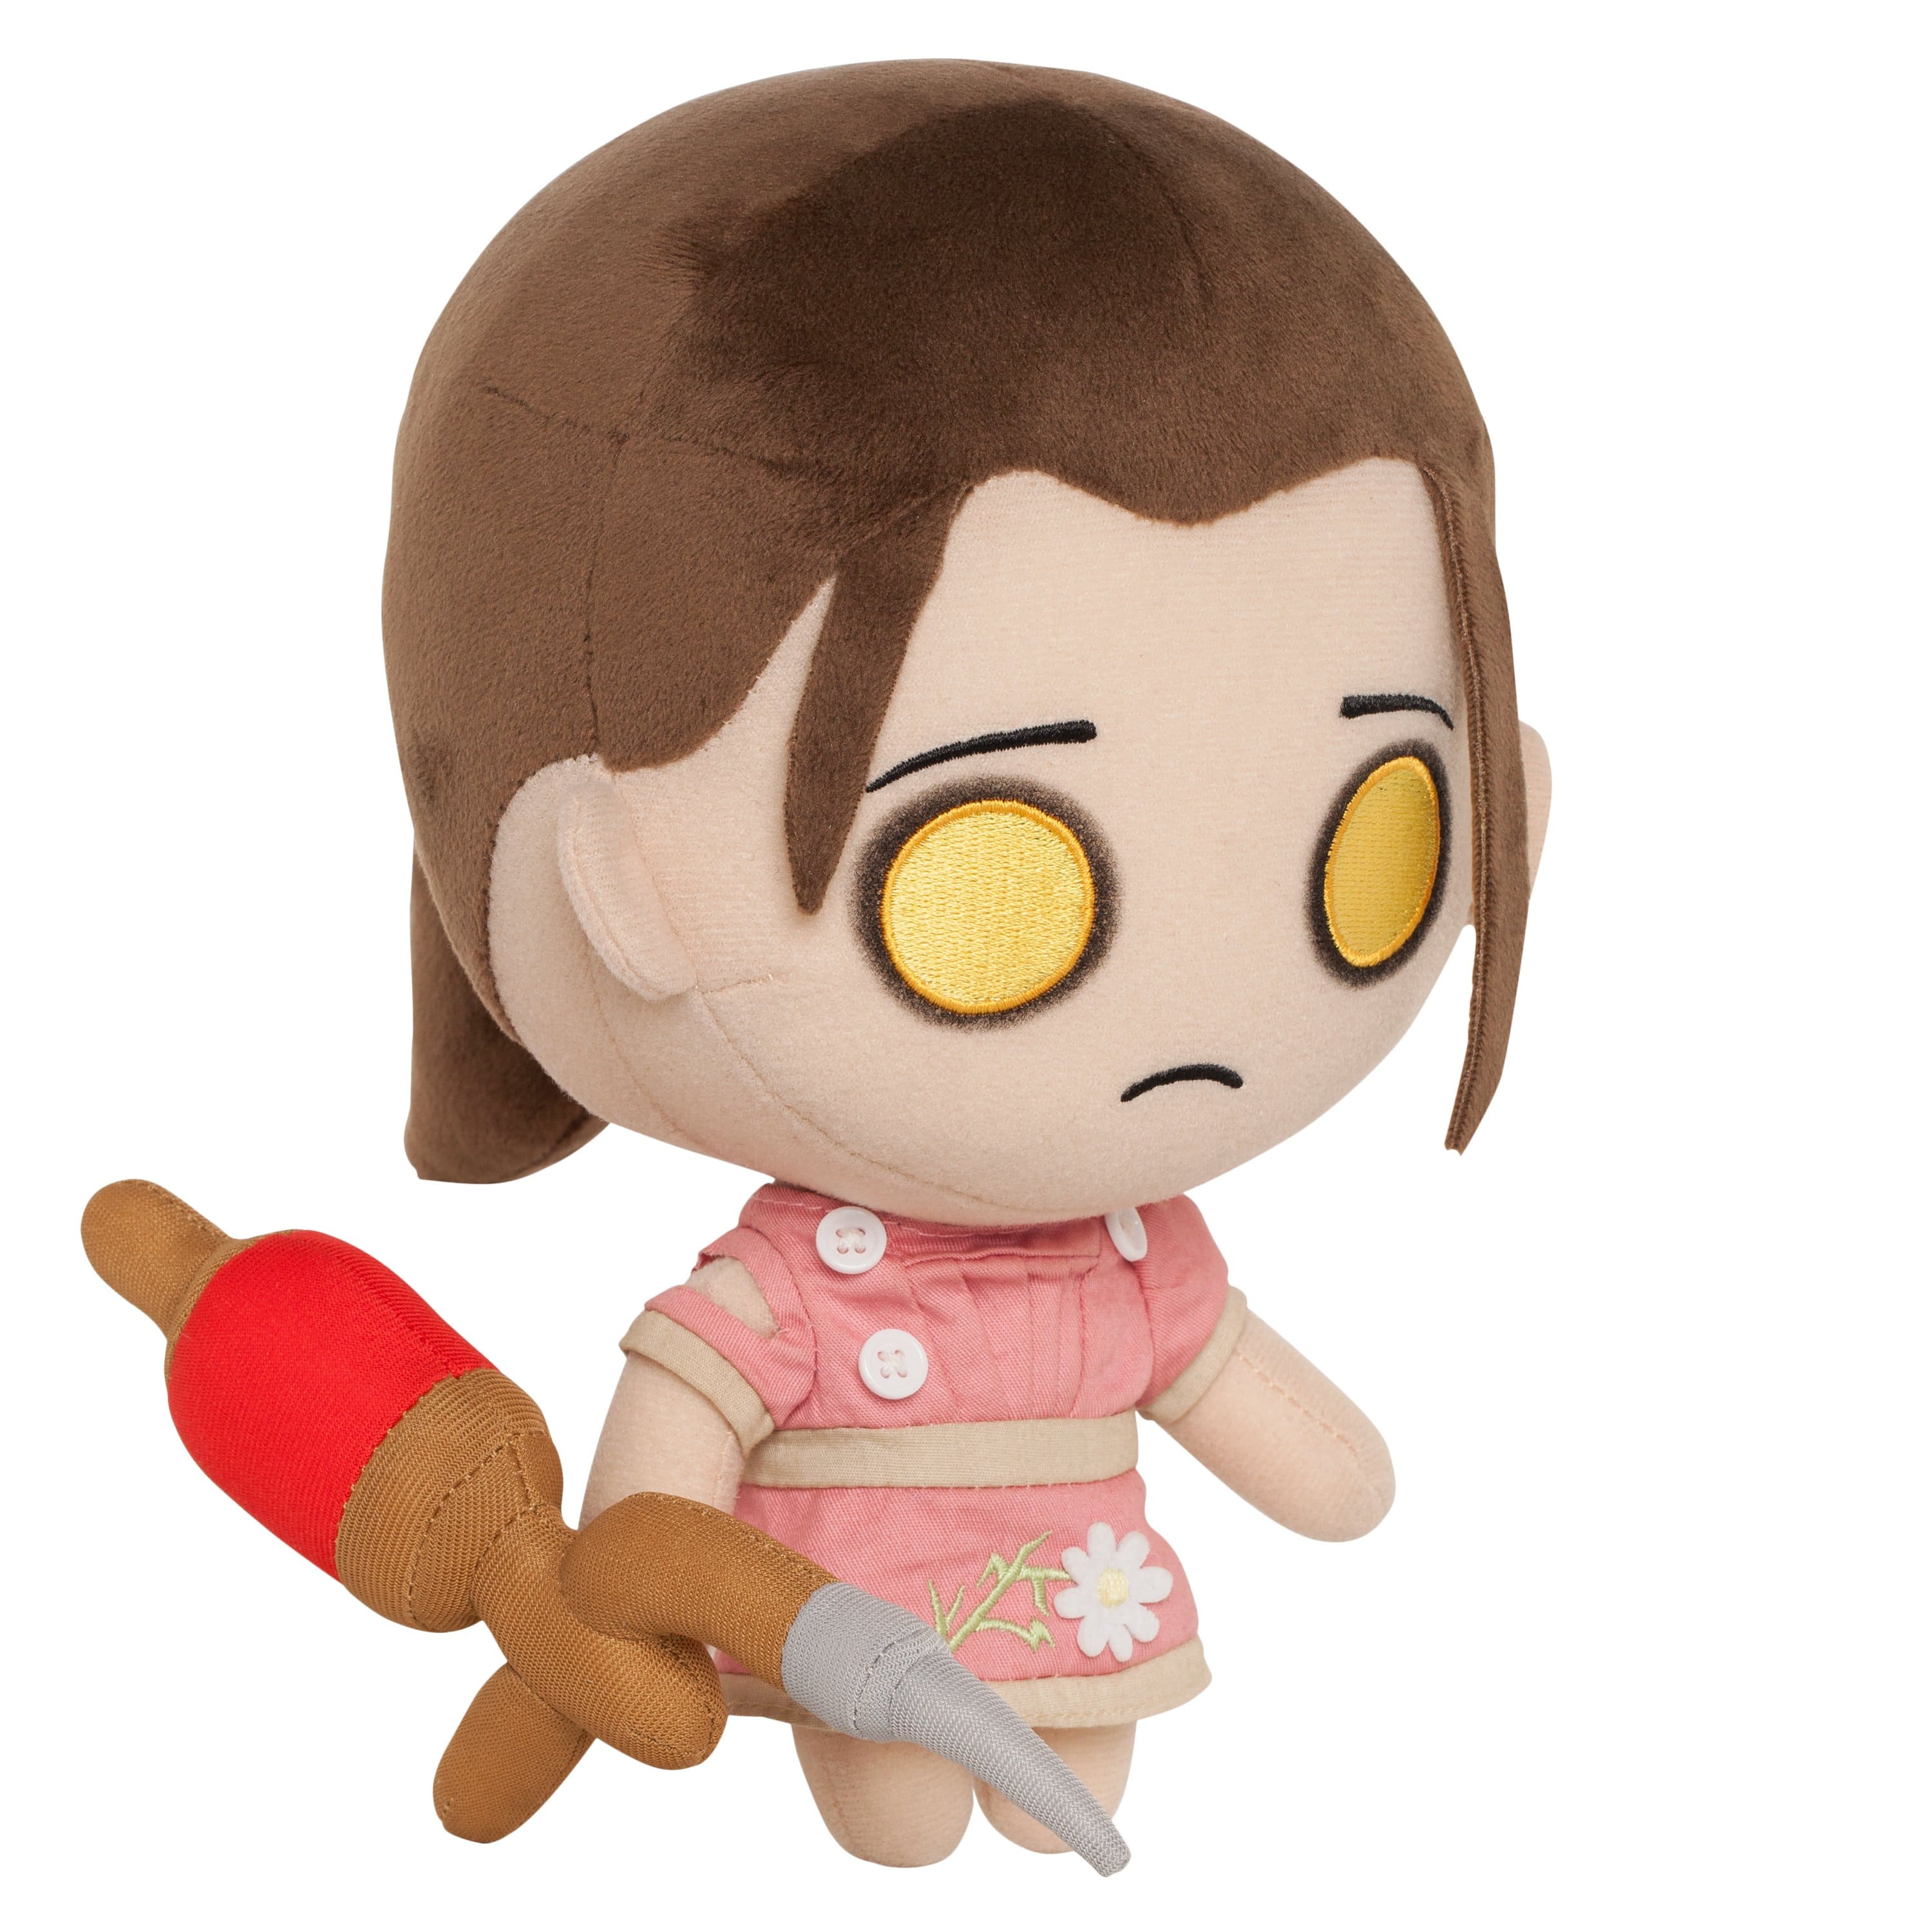 BioShock - 10" Little Sister Collector's Stuffed Plush Side View